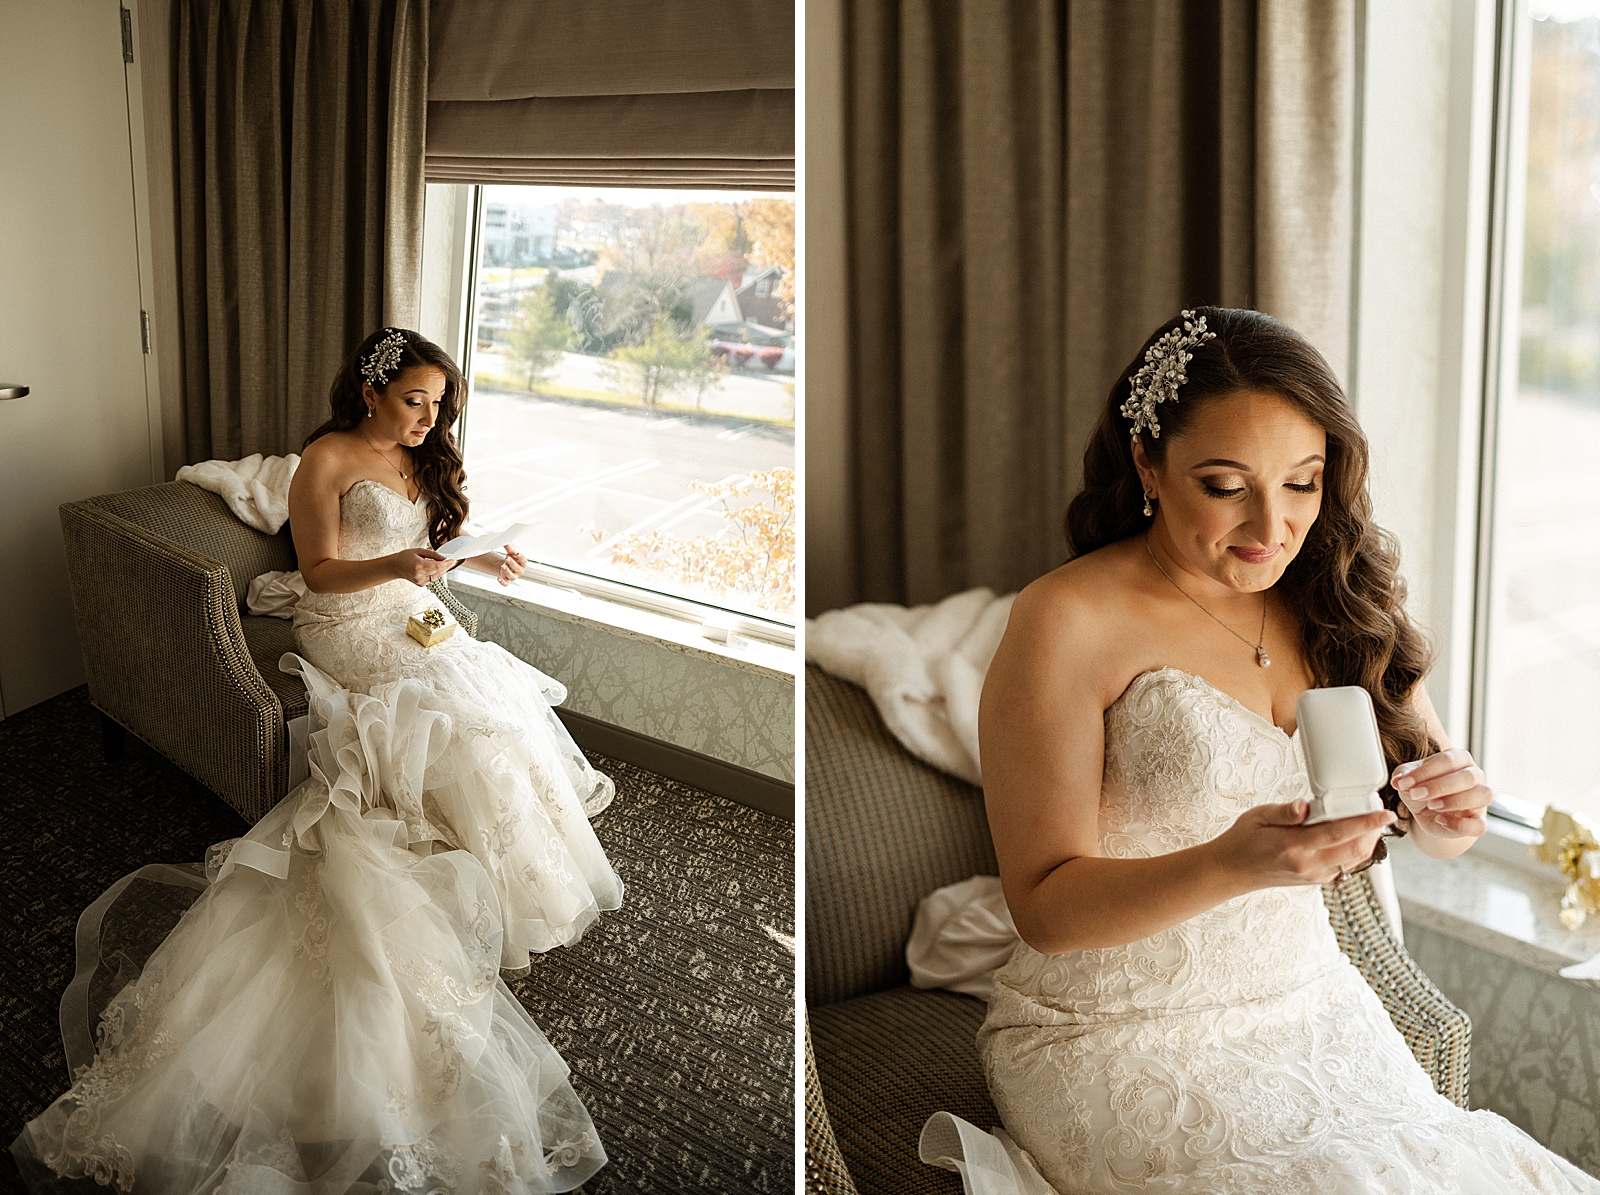 Bride reading letter by window getting ready